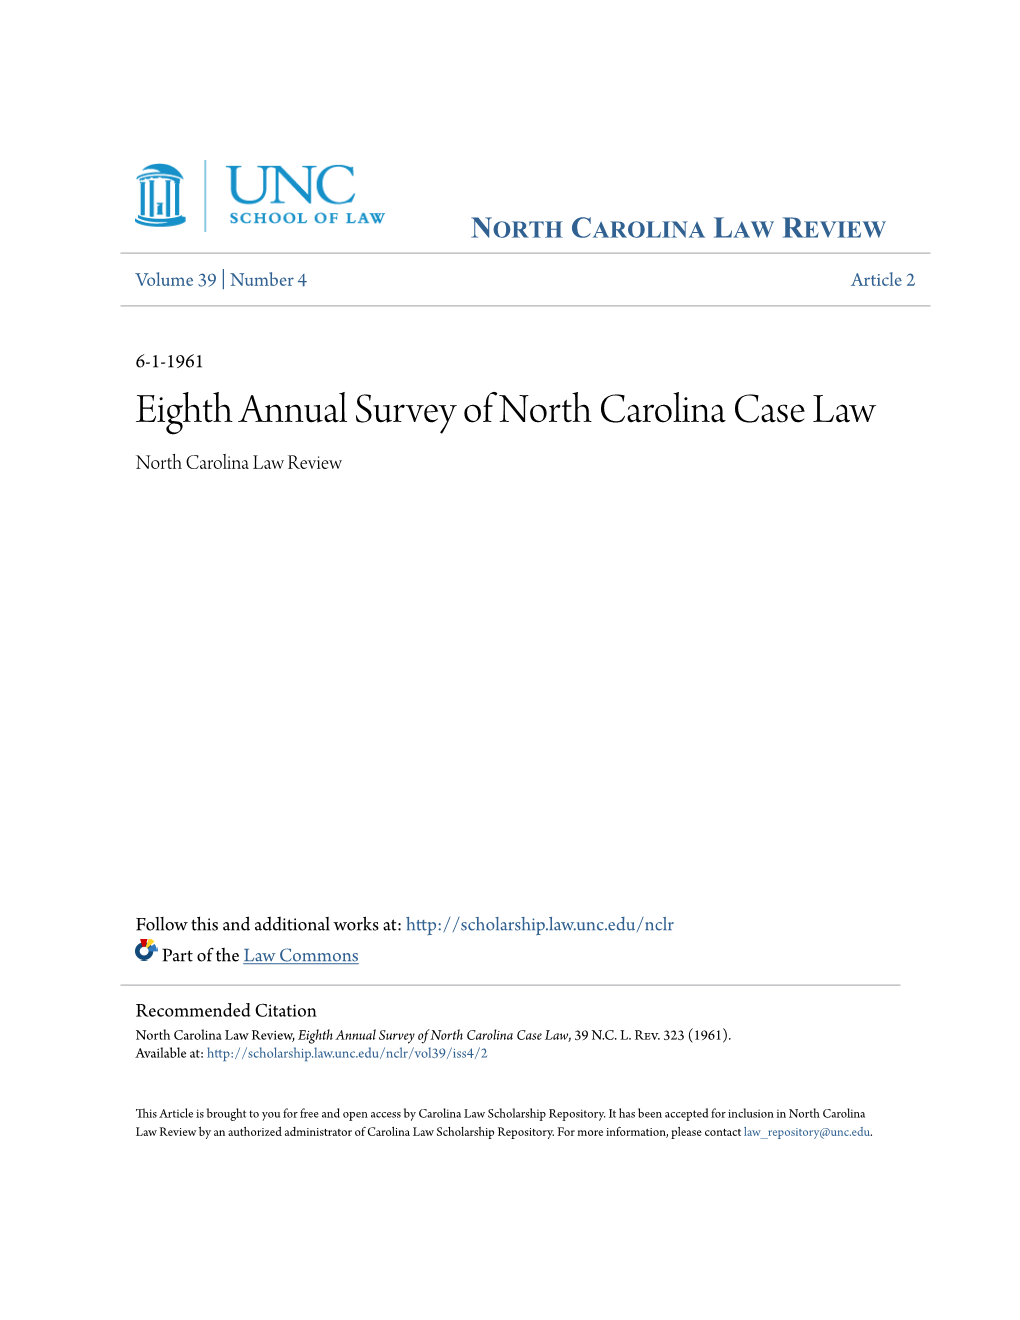 Eighth Annual Survey of North Carolina Case Law North Carolina Law Review